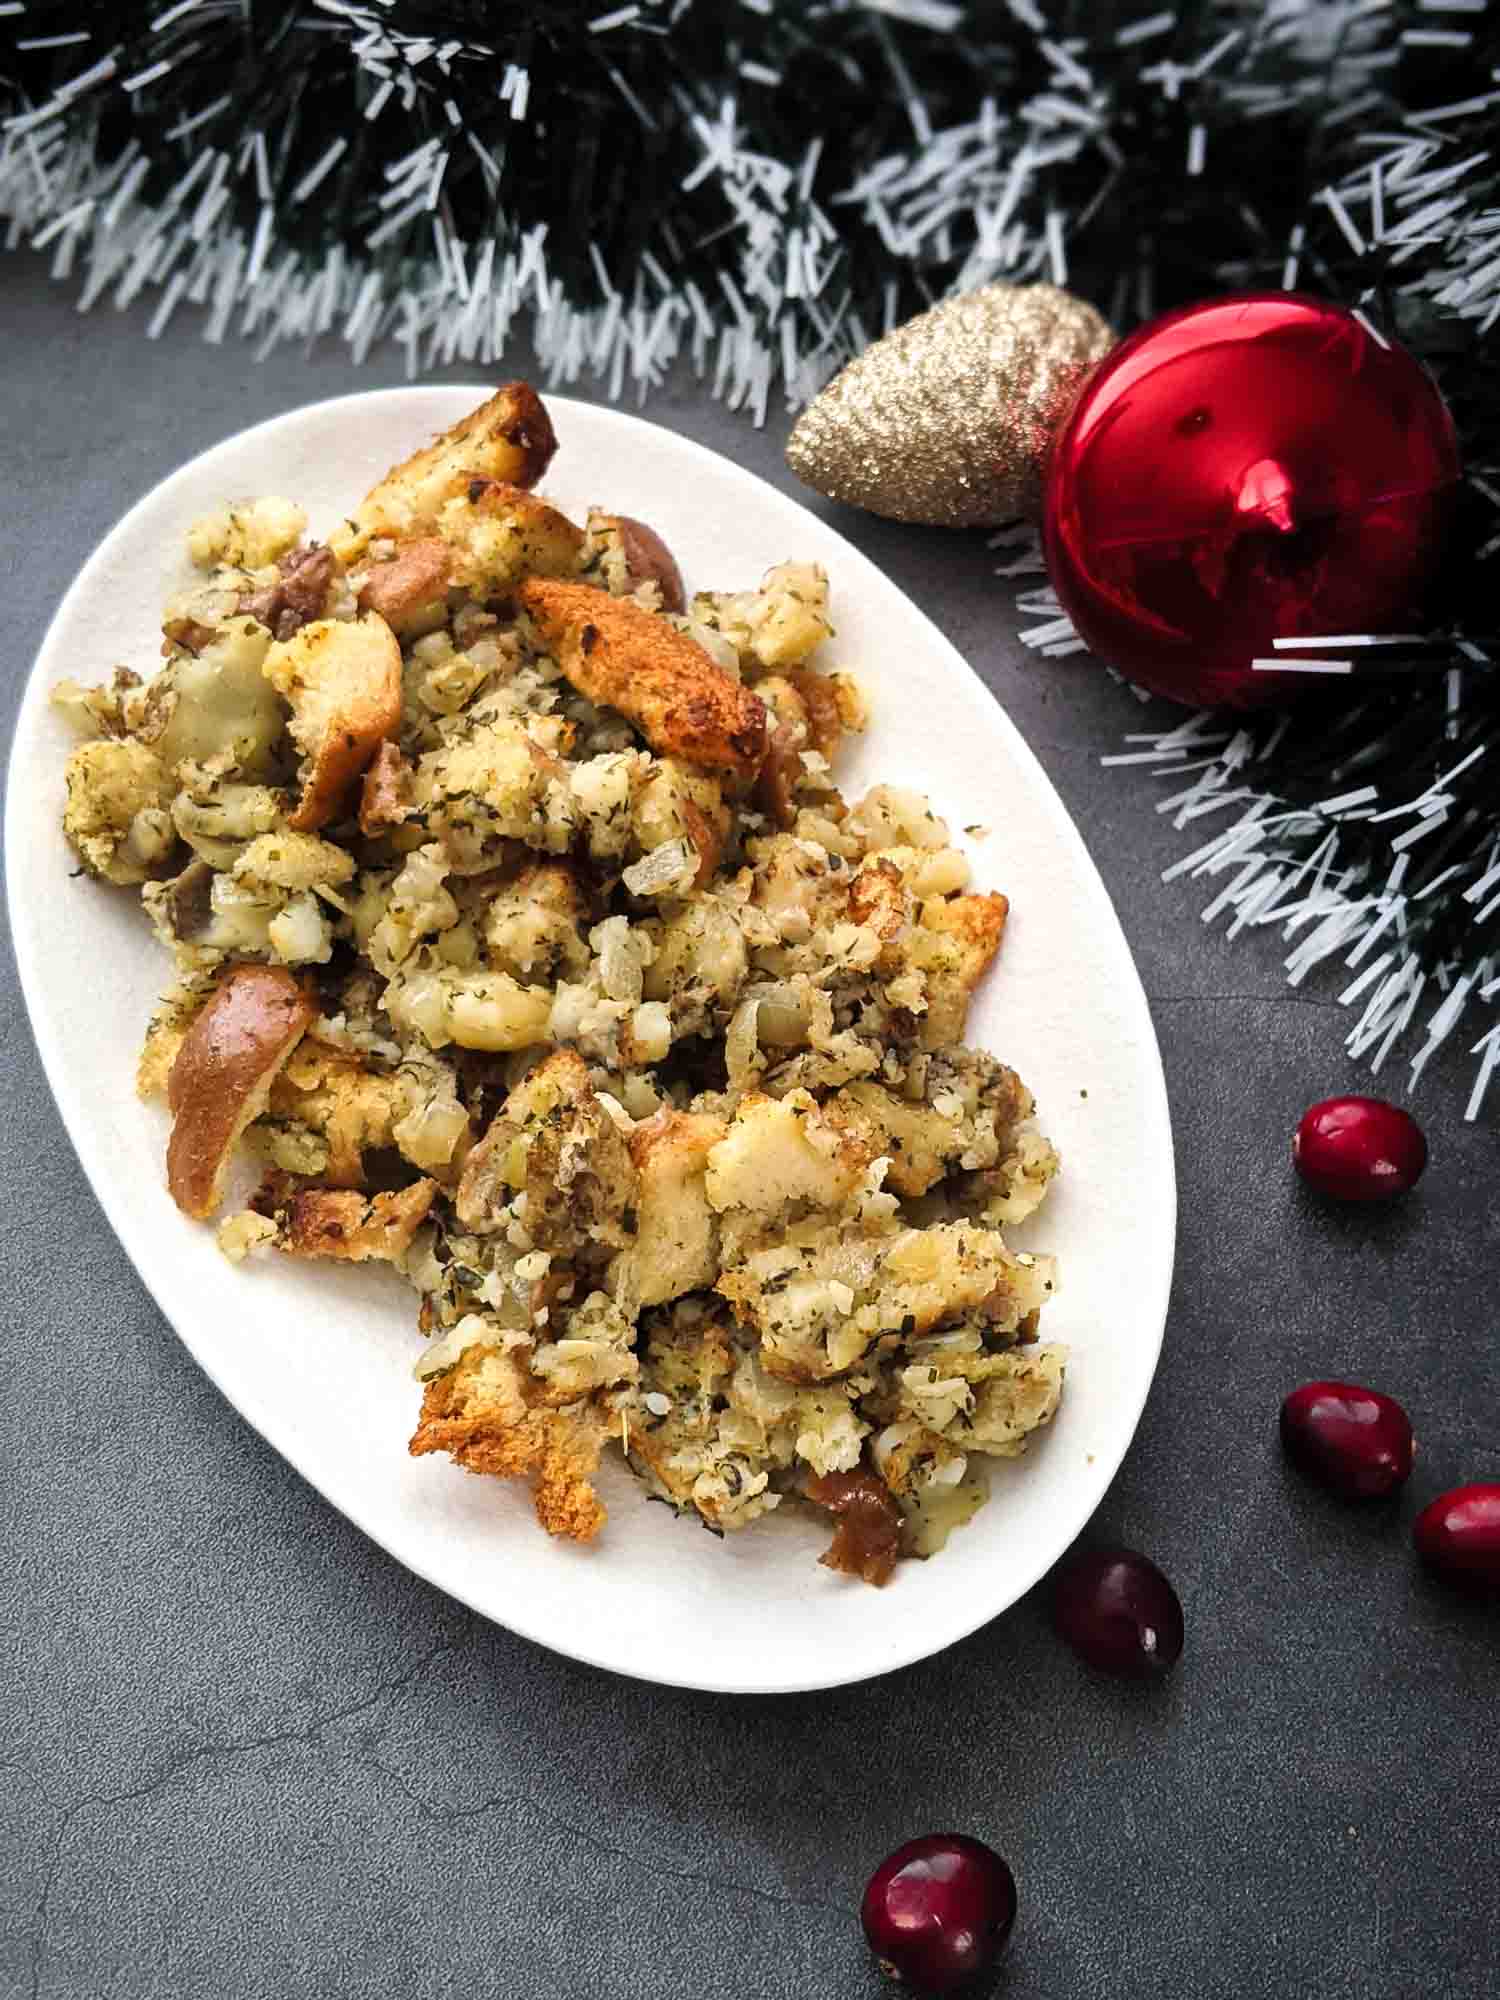 Turkey dressing with bread and potato on white plate grey background with Christmas ornaments